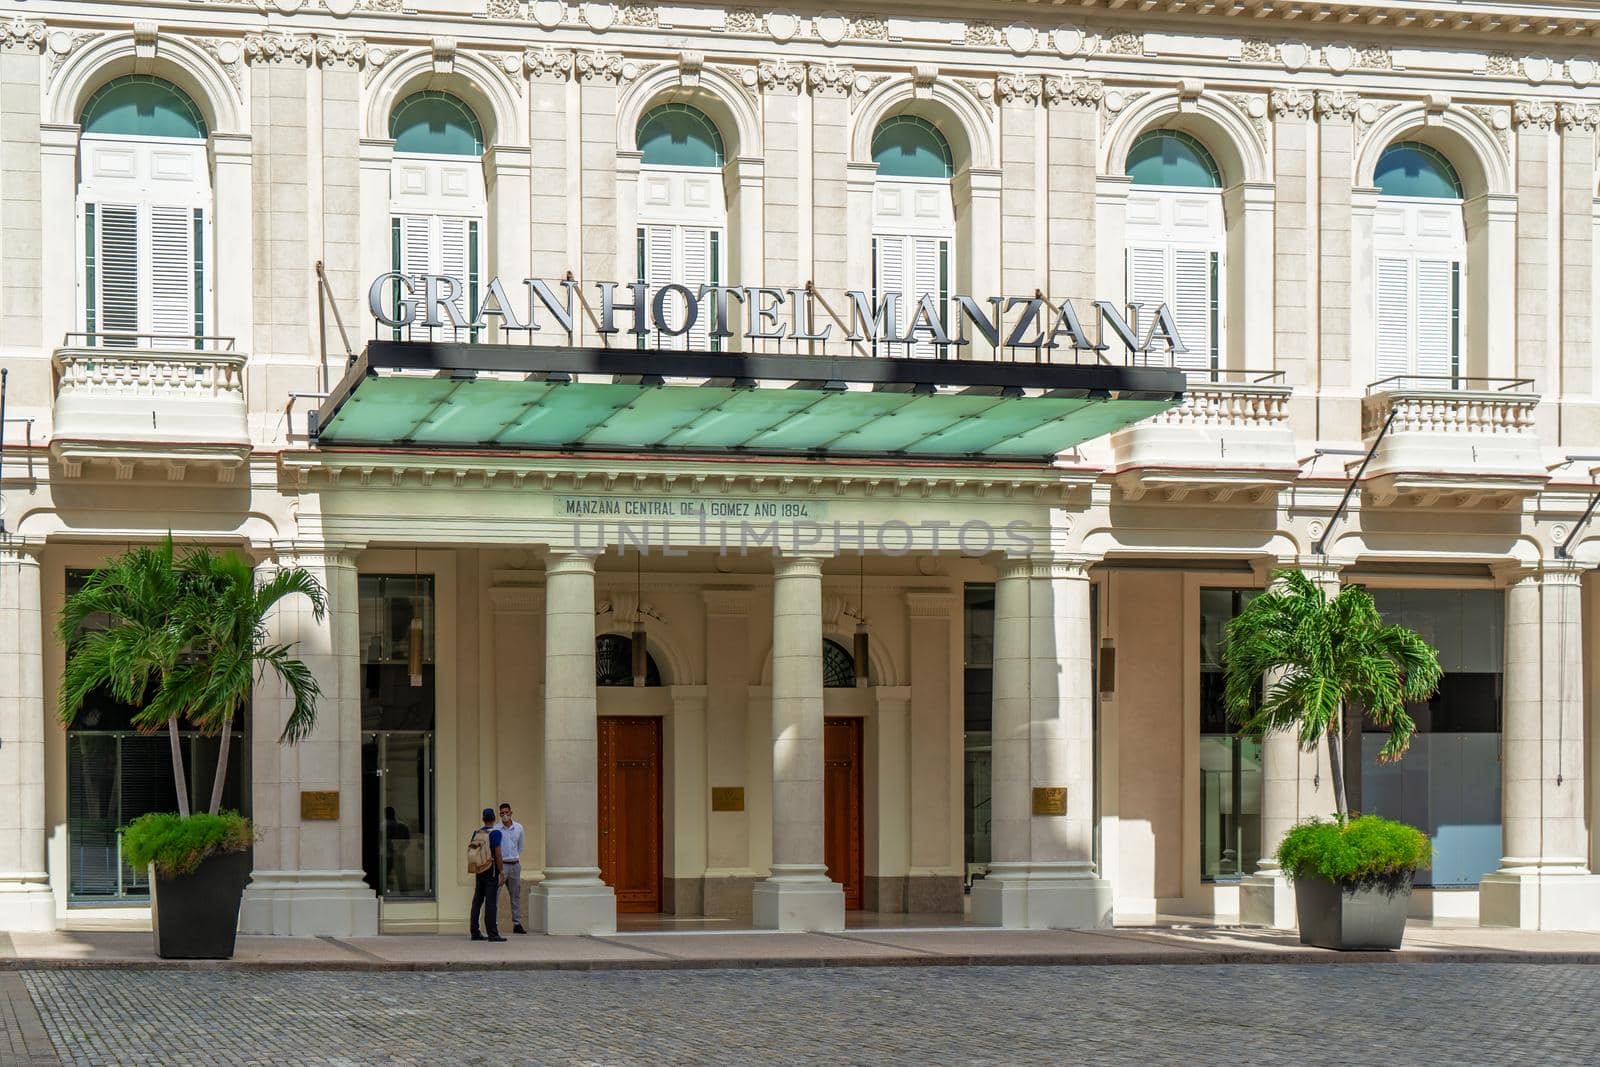 Havana Cuba. November 25, 2020: Facade and entrance of the Gran Hotel Manzana, a place visited by tourists